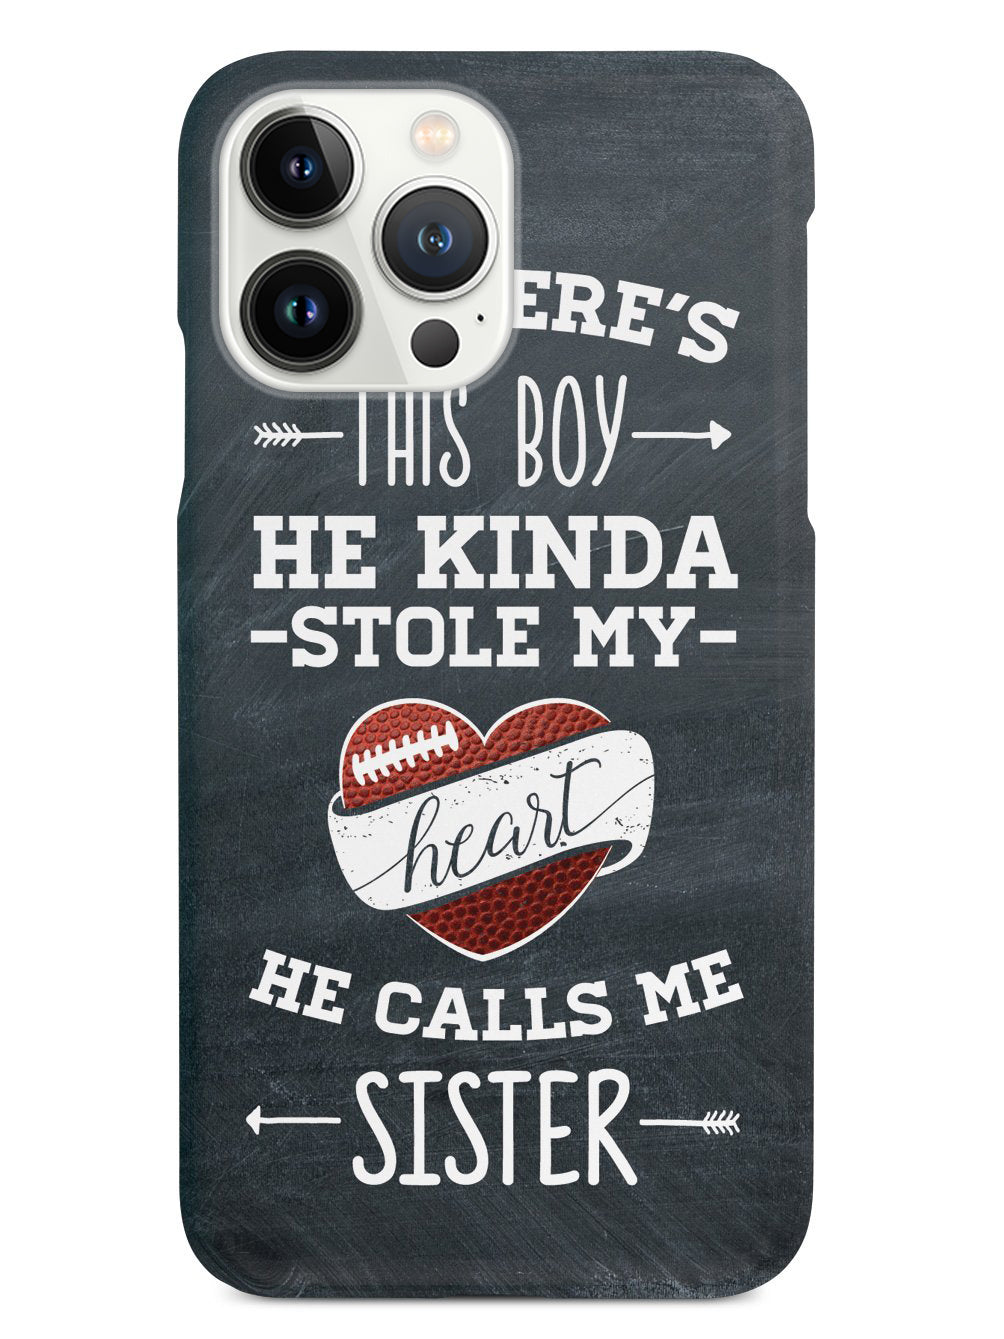 So there's this Boy - Football Player - Sister Case